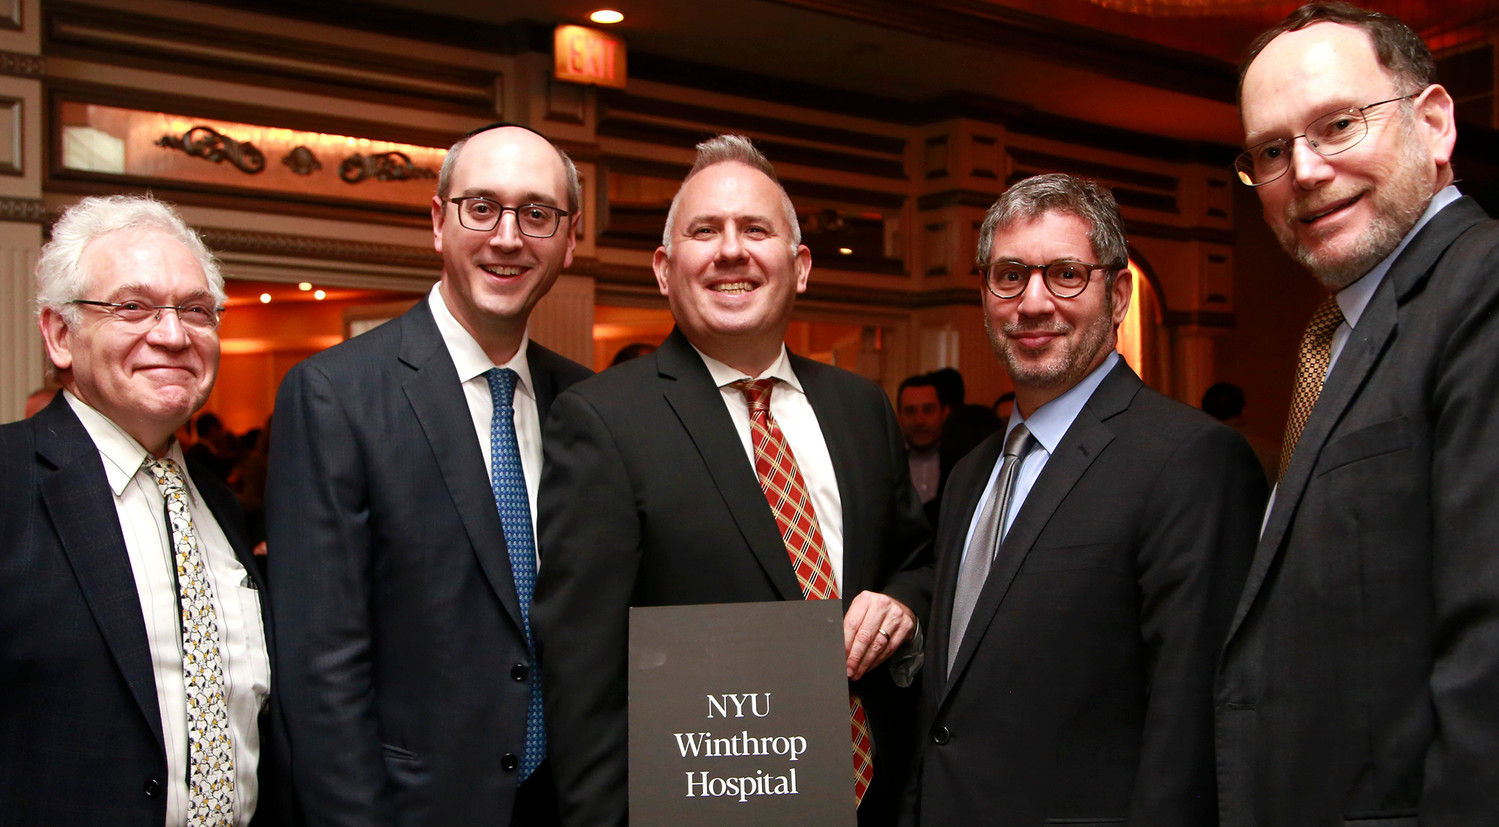 Among the staff of many hospitals and other medical institutions at the Achiezer gala were these representatives of NYU Winthrop Hospital — Dr. Martin Weinblatt, Dr. Tovia Marciano, Dr. Abraham Peller, Dr. Marc Adler and Bruce Cohn.